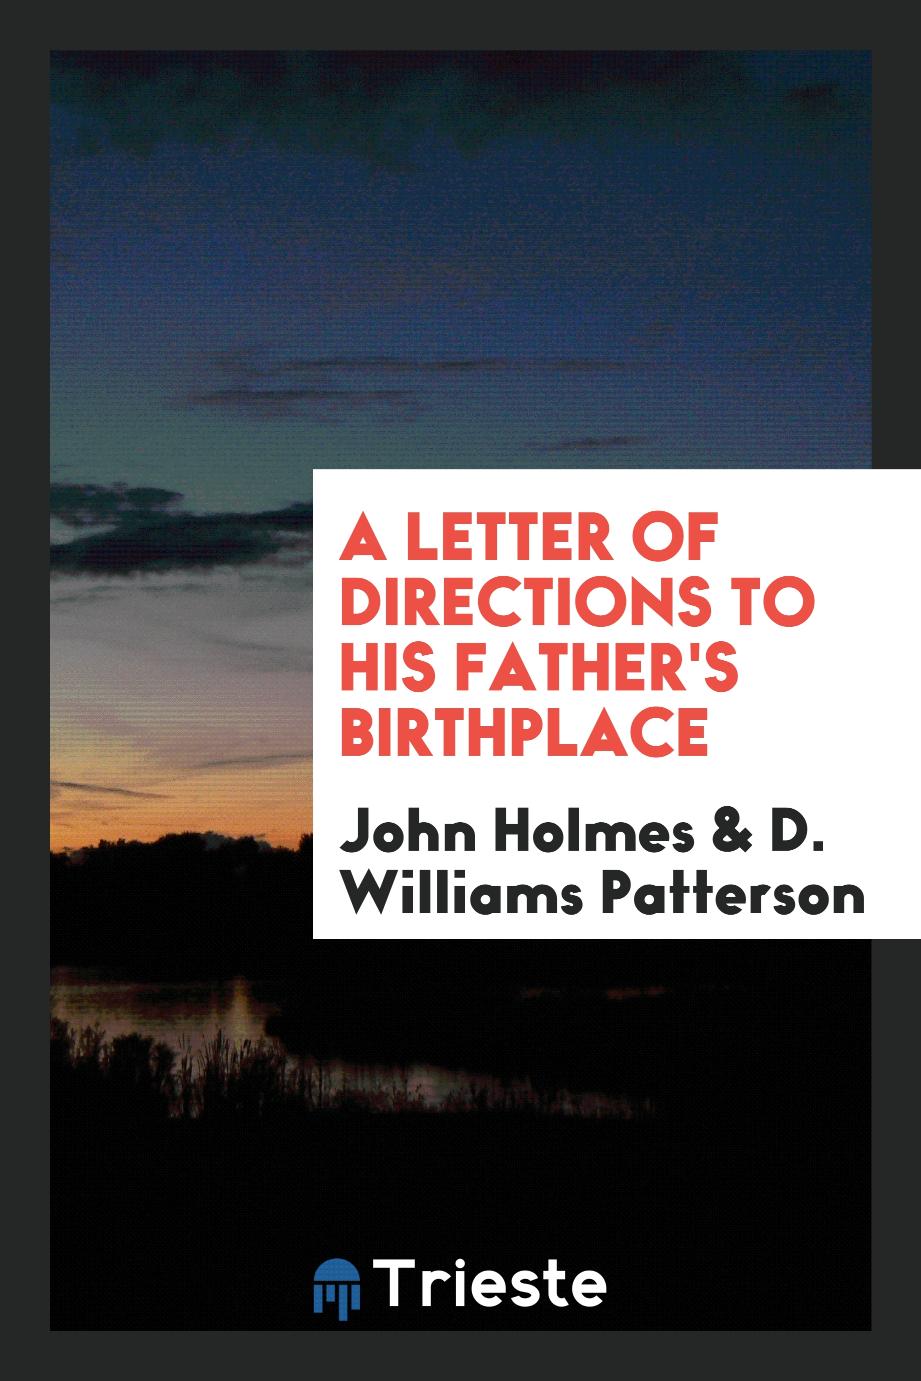 A Letter of Directions to His Father's Birthplace